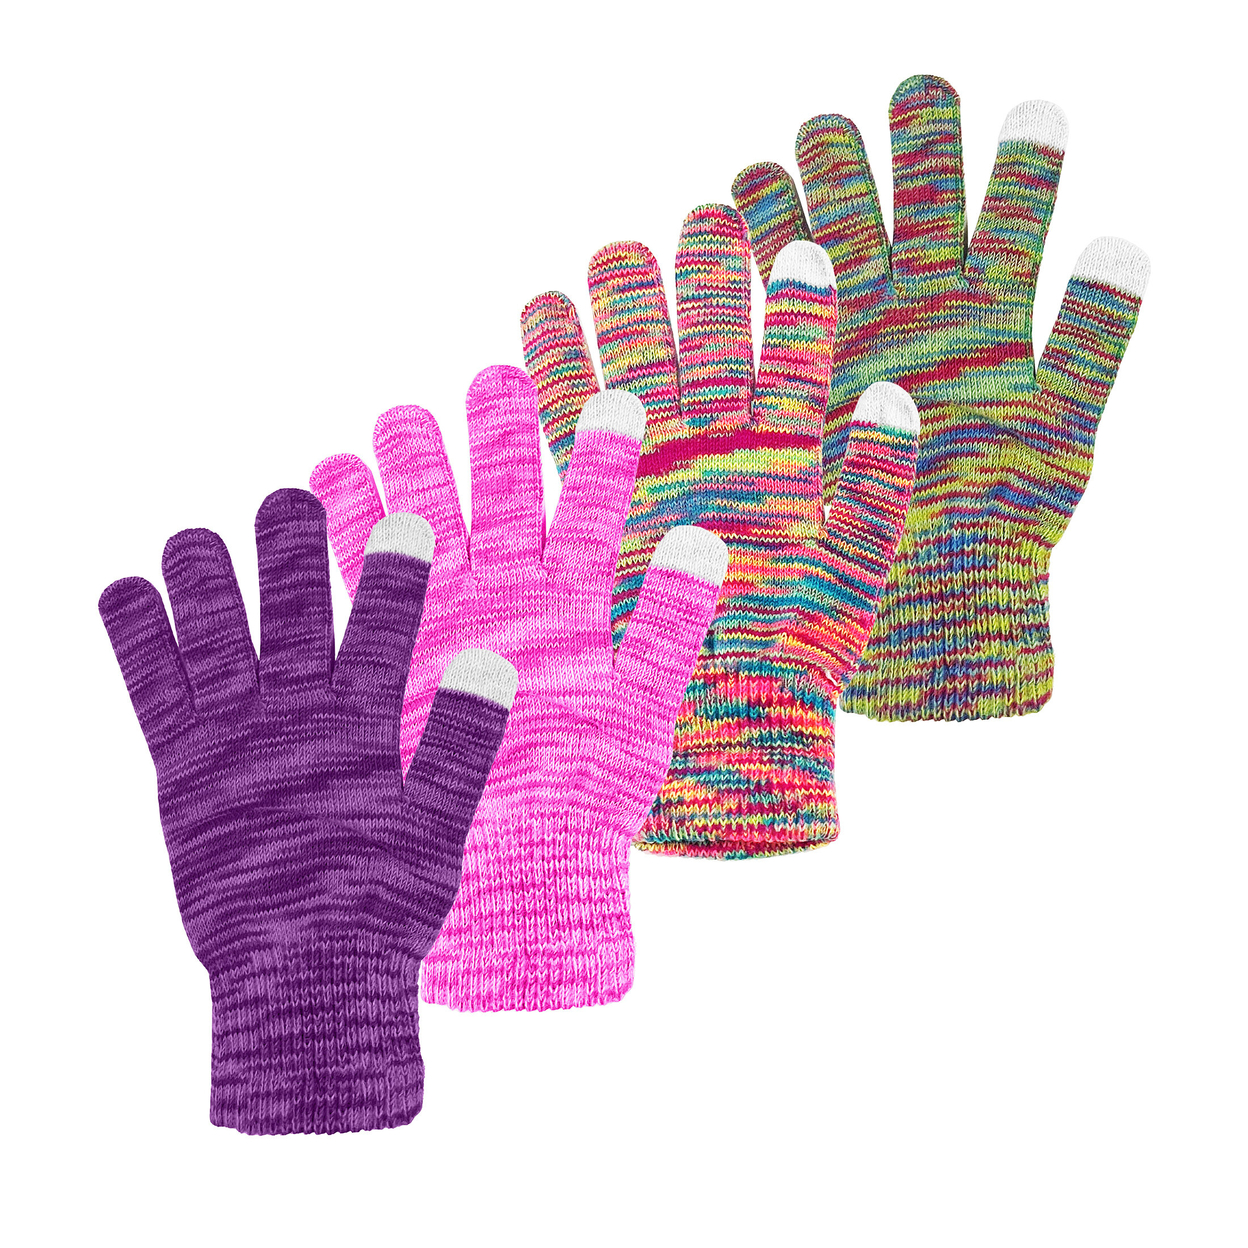 2-Pairs: Women's Winter Warm Soft Knit Touchscreen Multi-Tone Texting Gloves